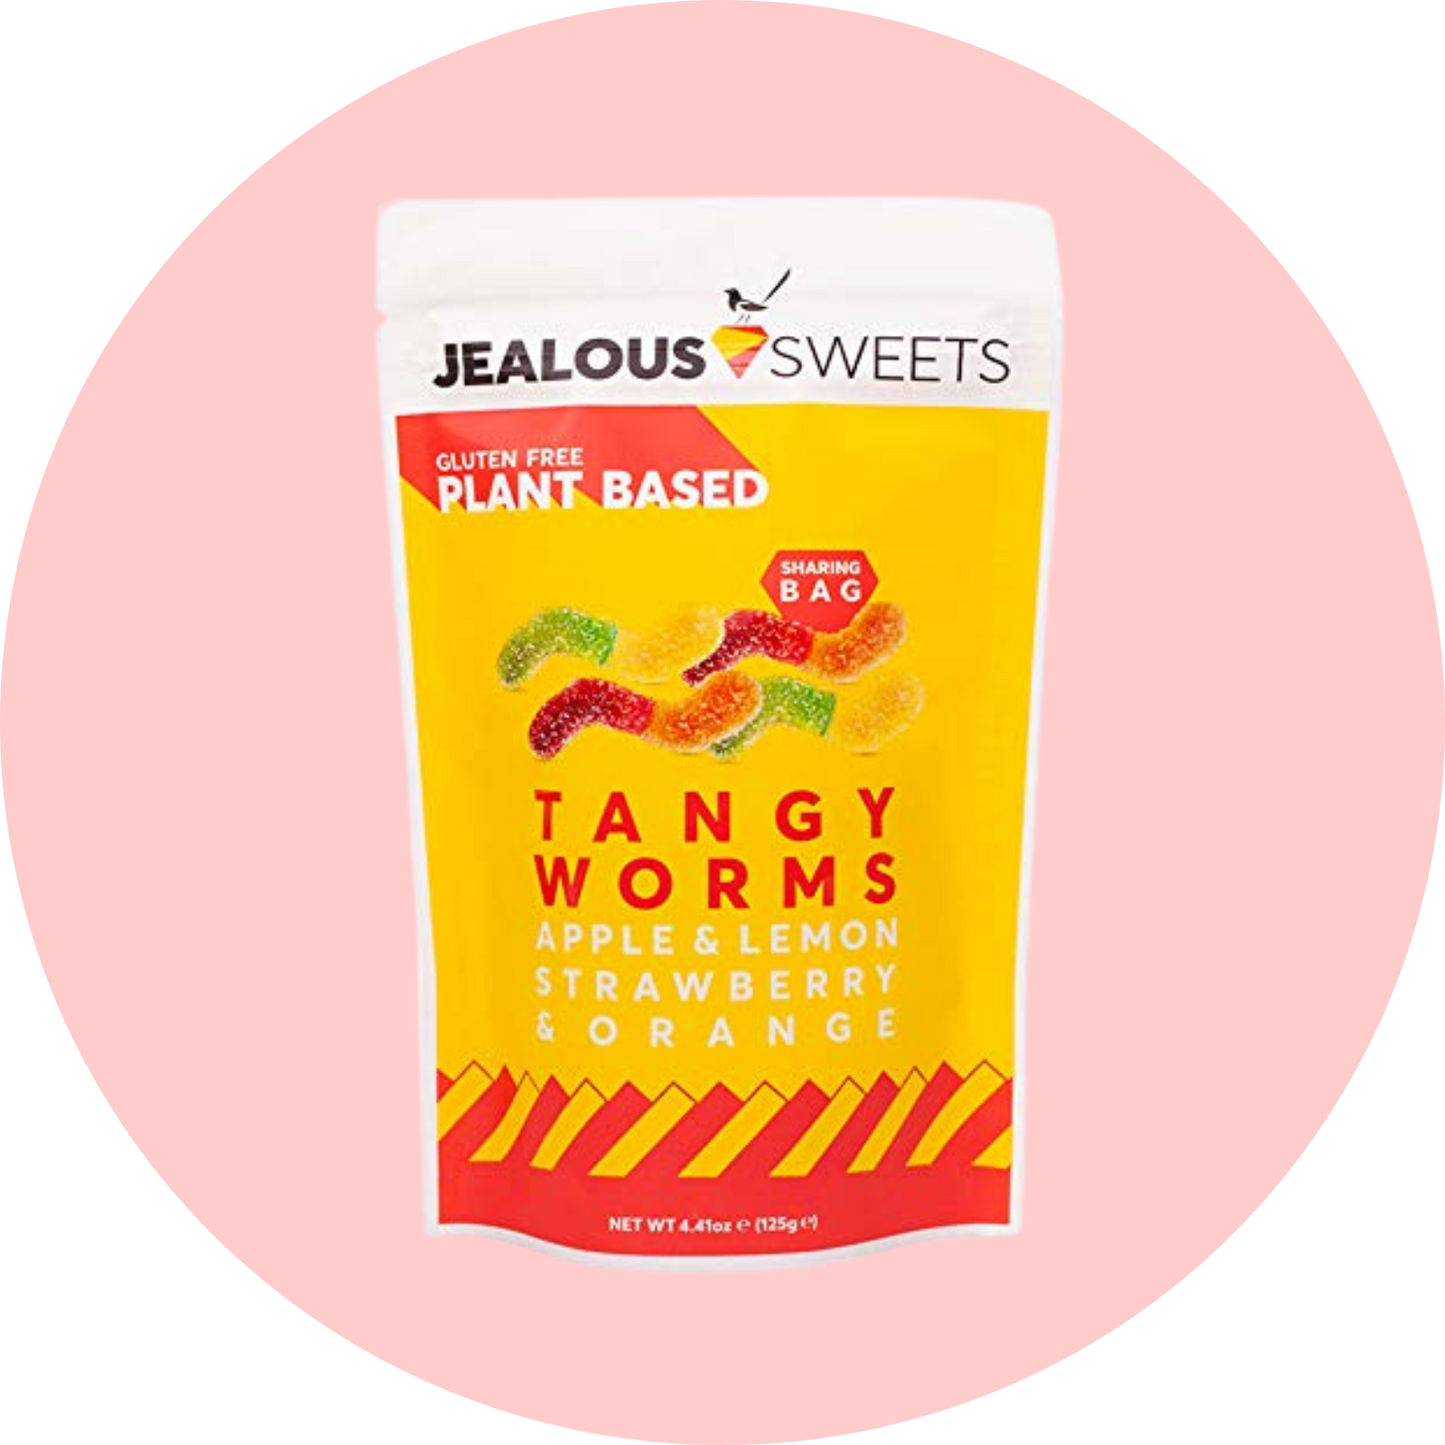 Jealous Sweets Tangy Worms